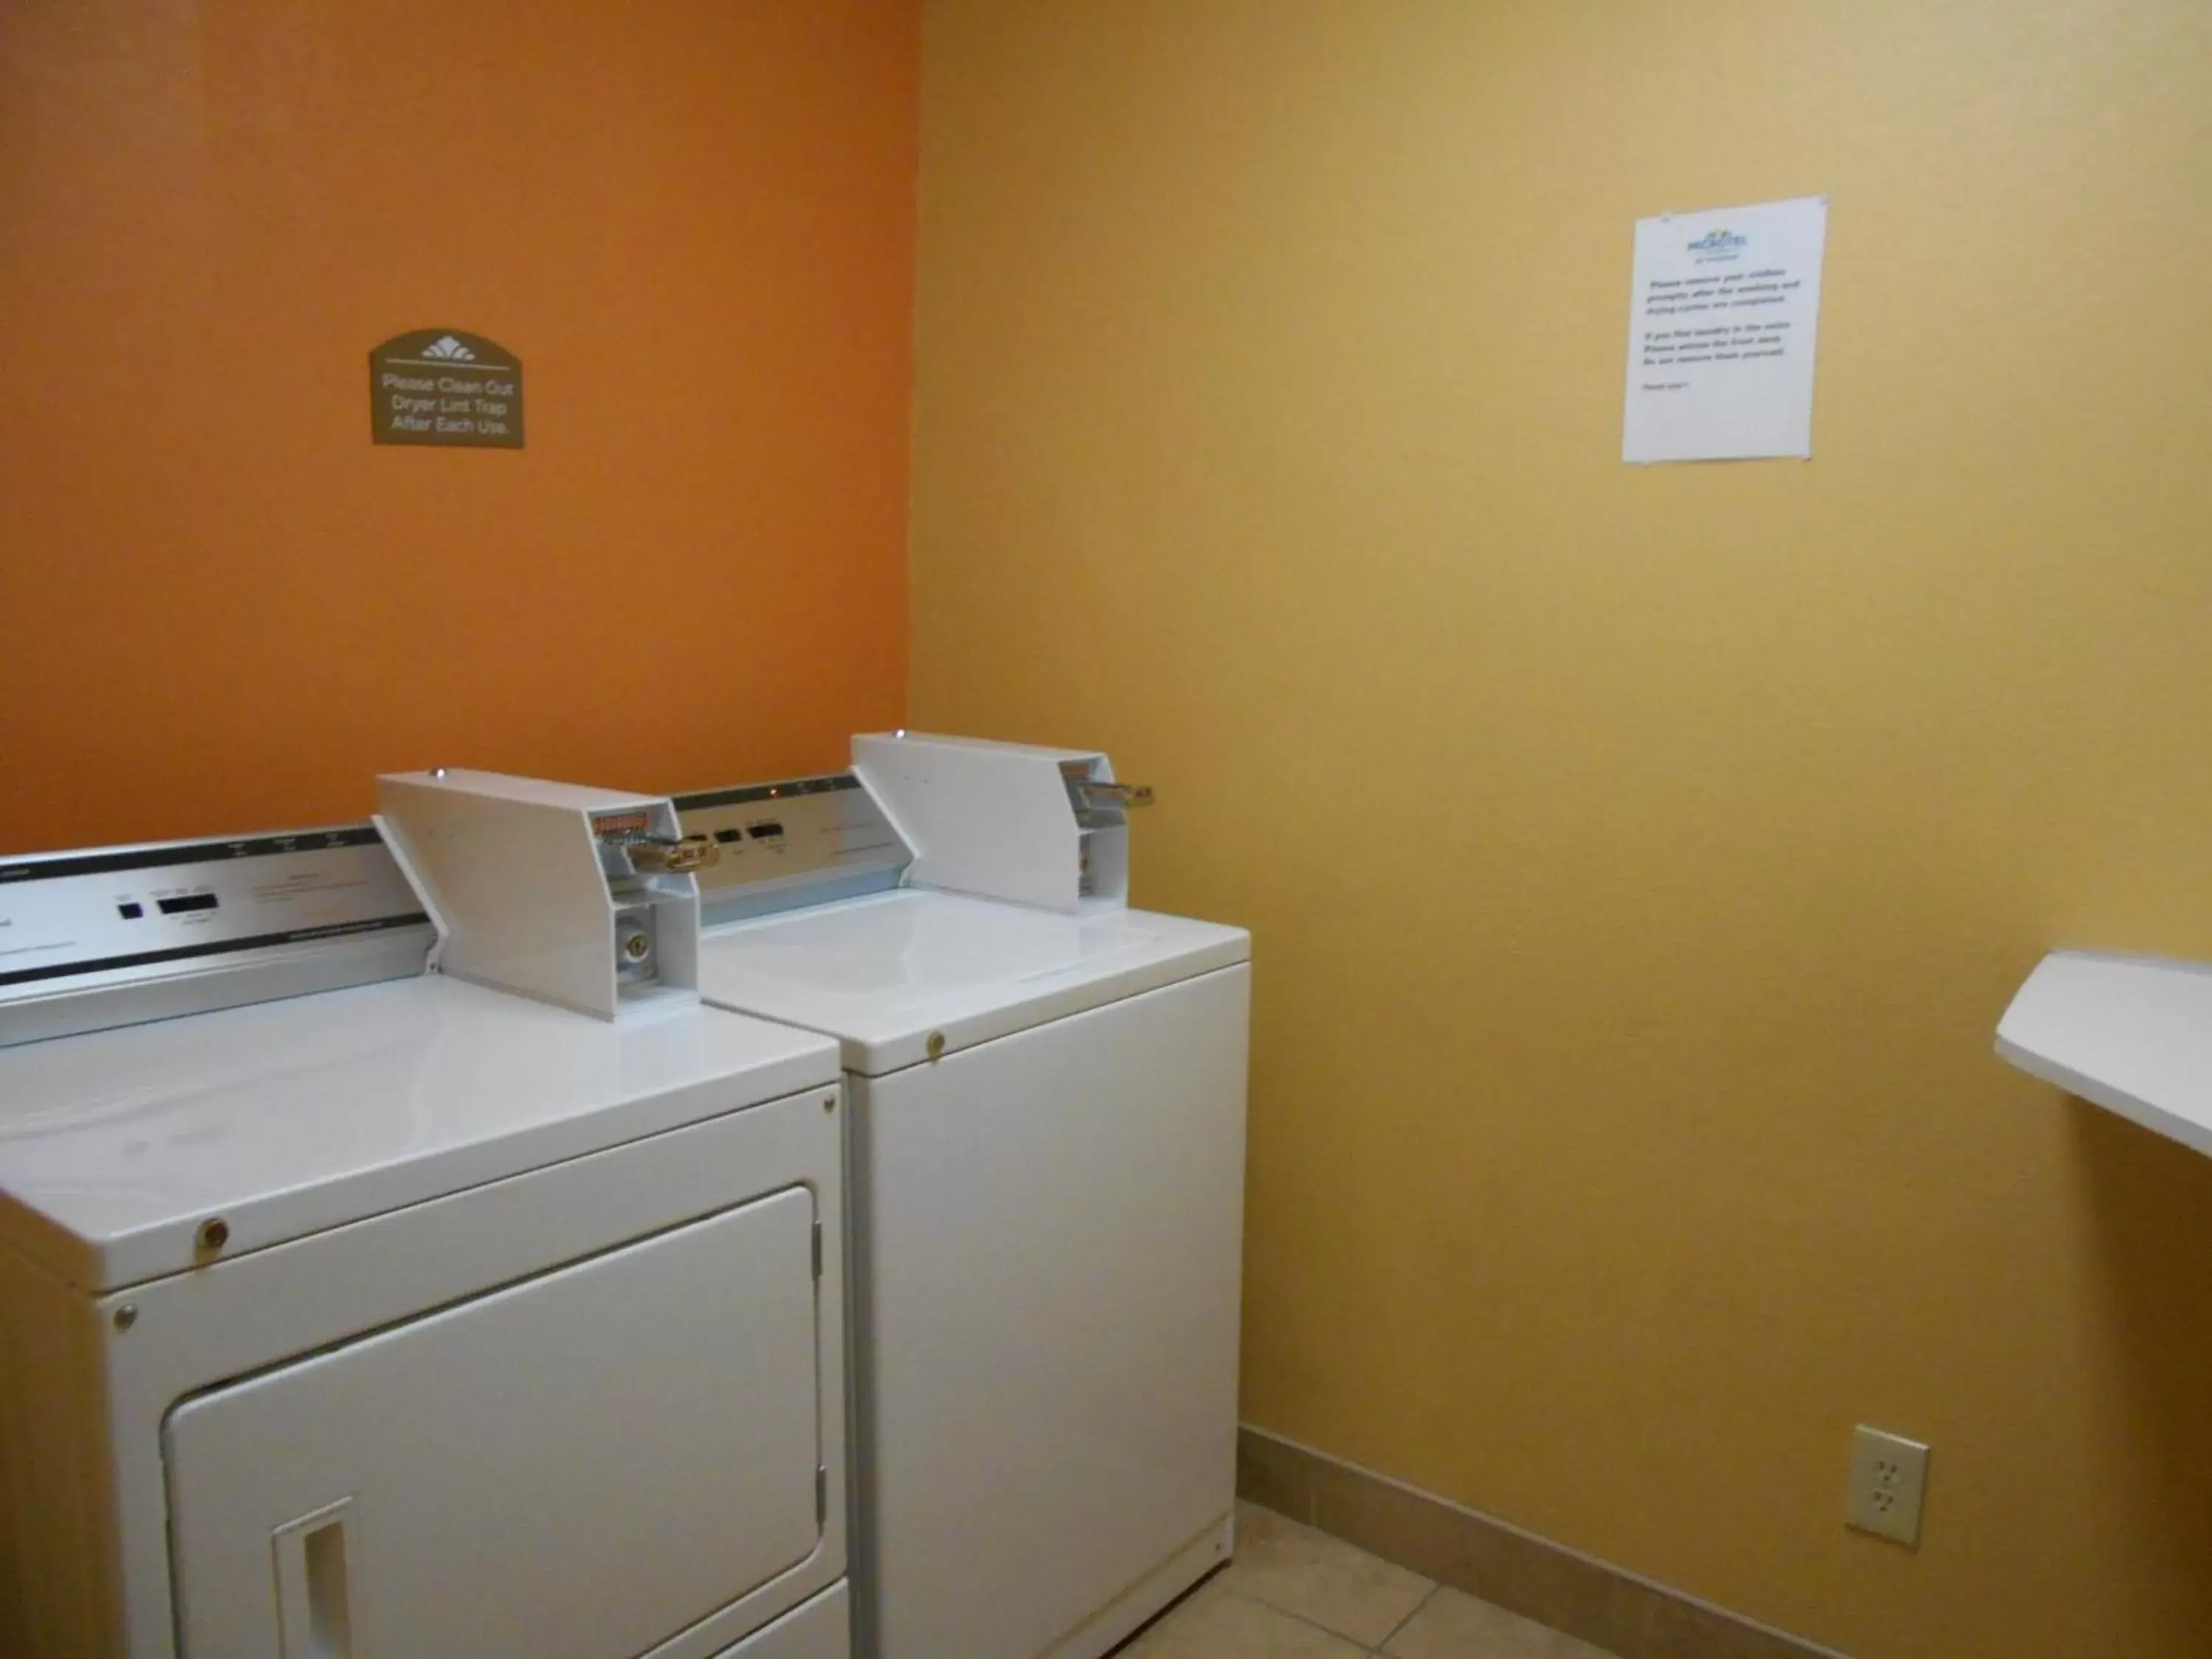 Area and facilities, Bathroom in Microtel Inn by Wyndham - Albany Airport